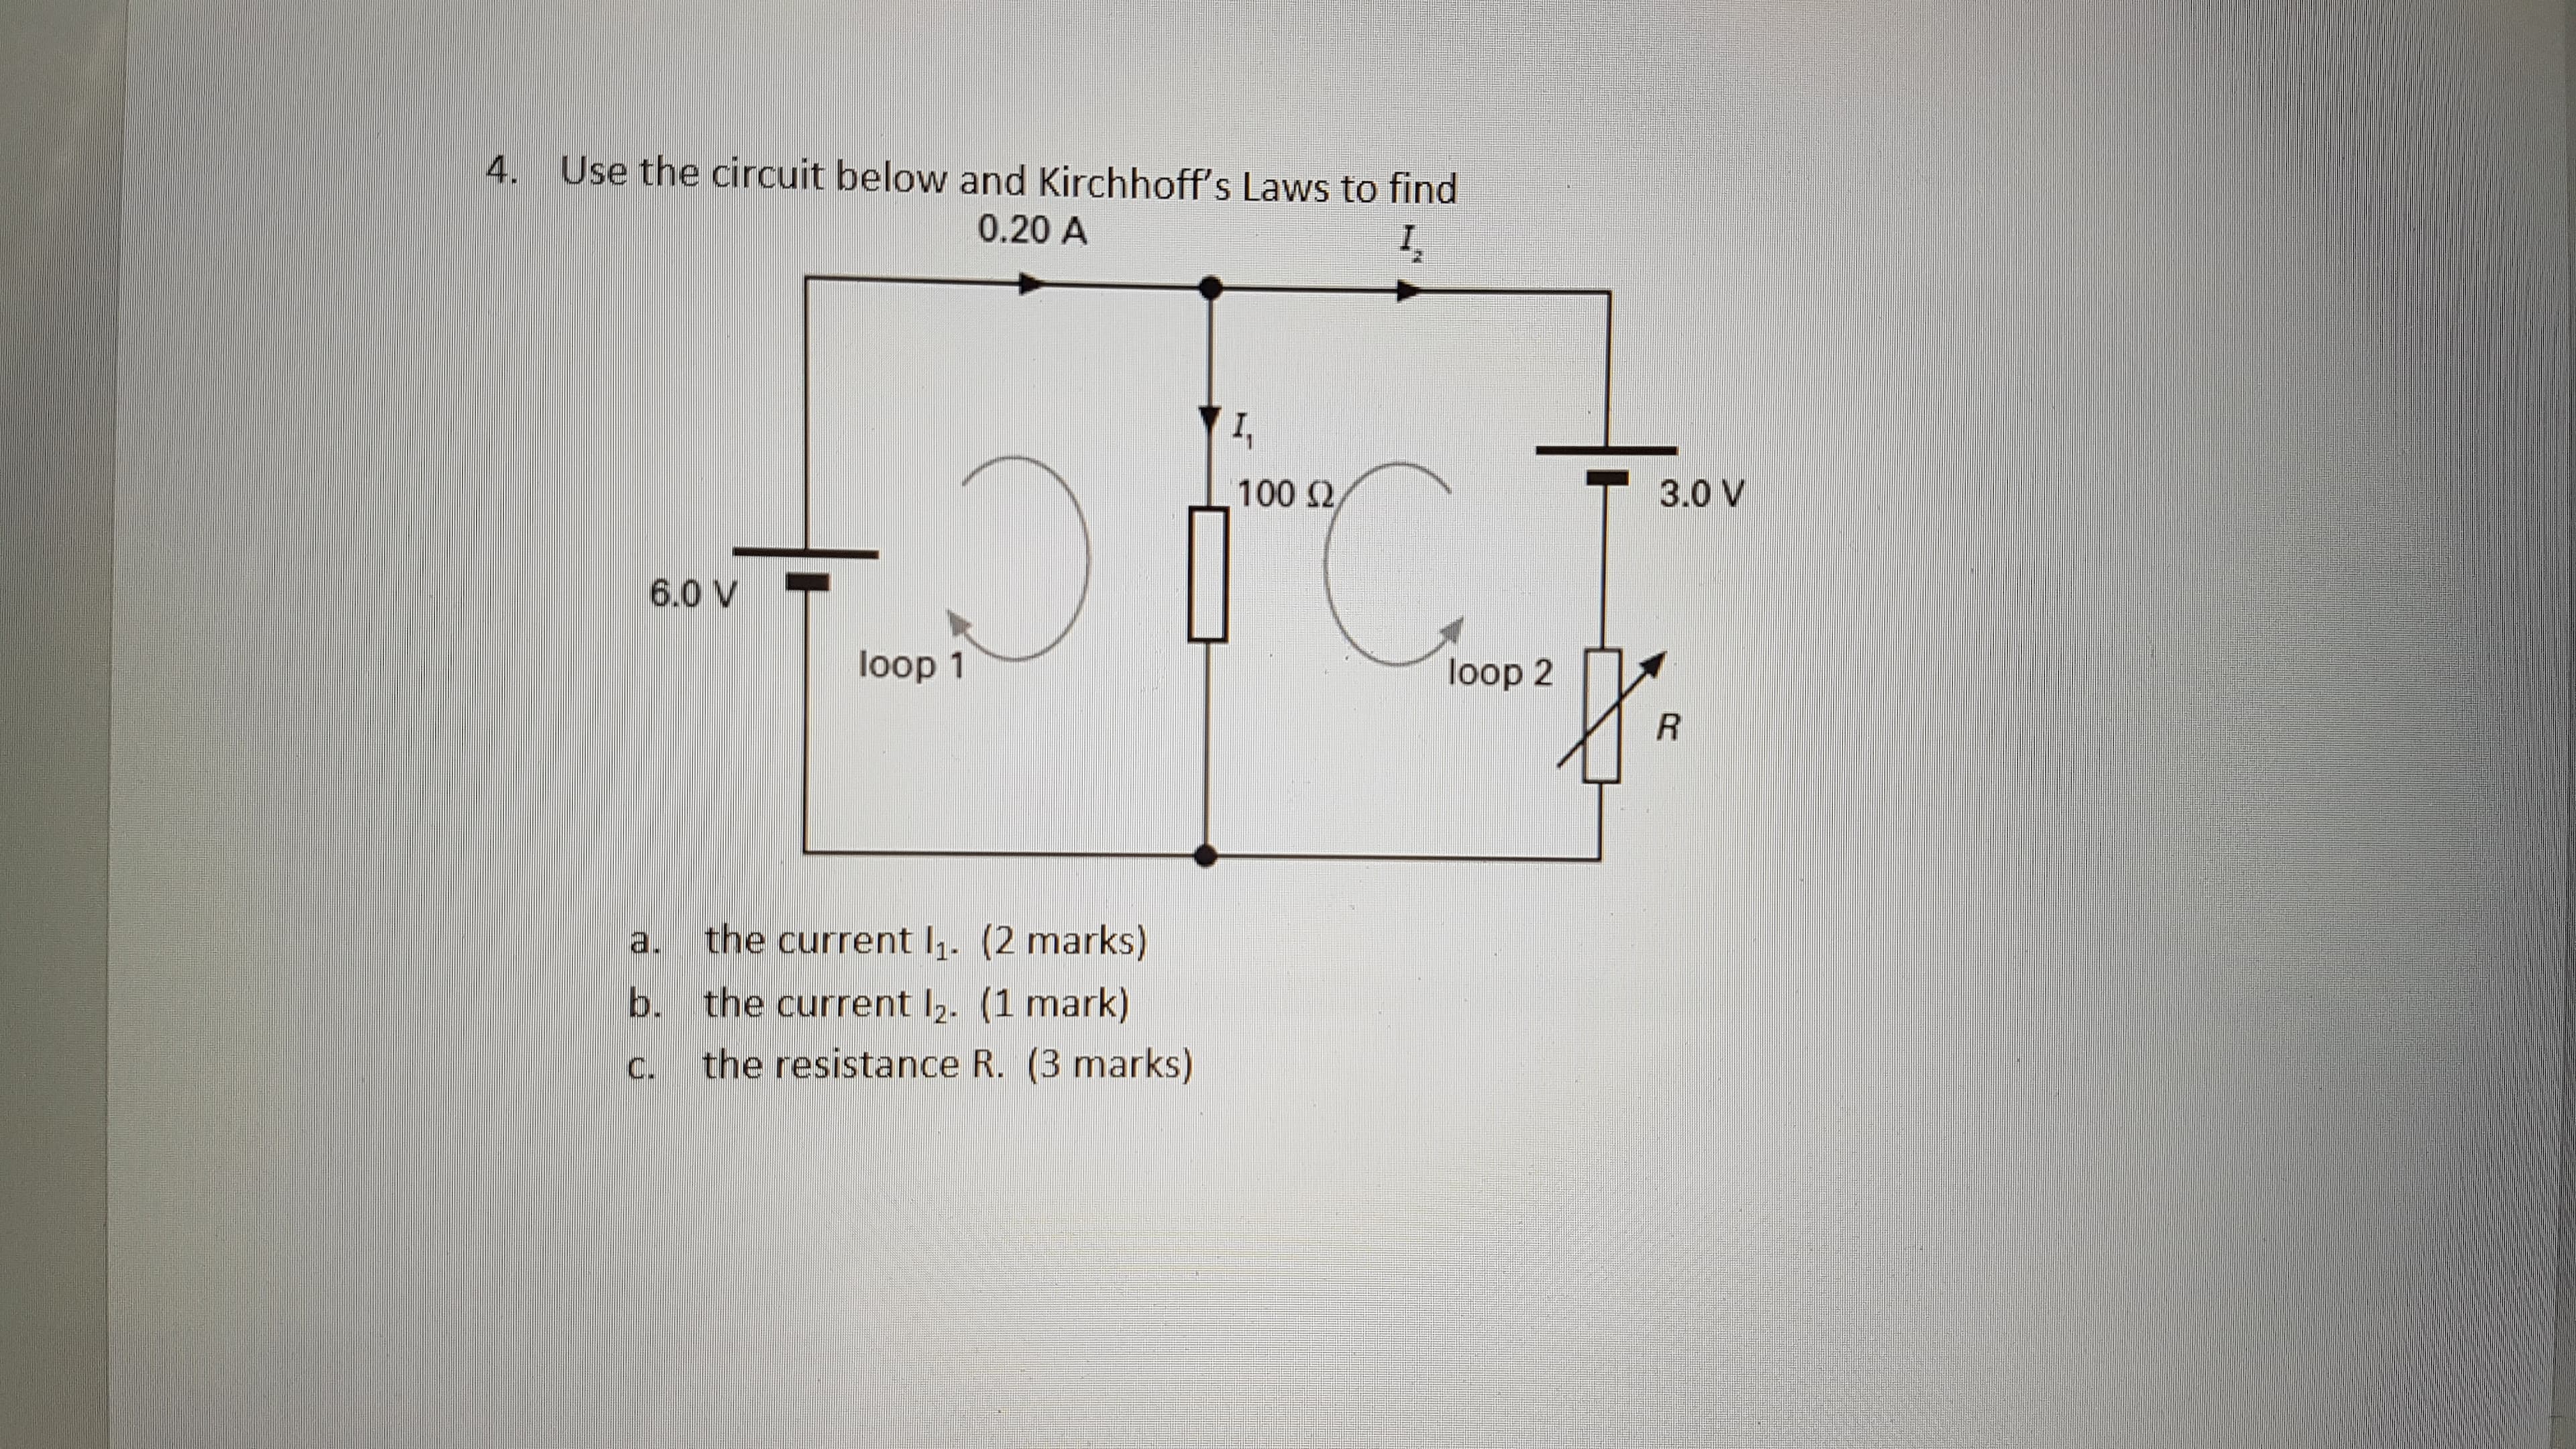 Use the circuit below and Kirchhoff's Laws to find
